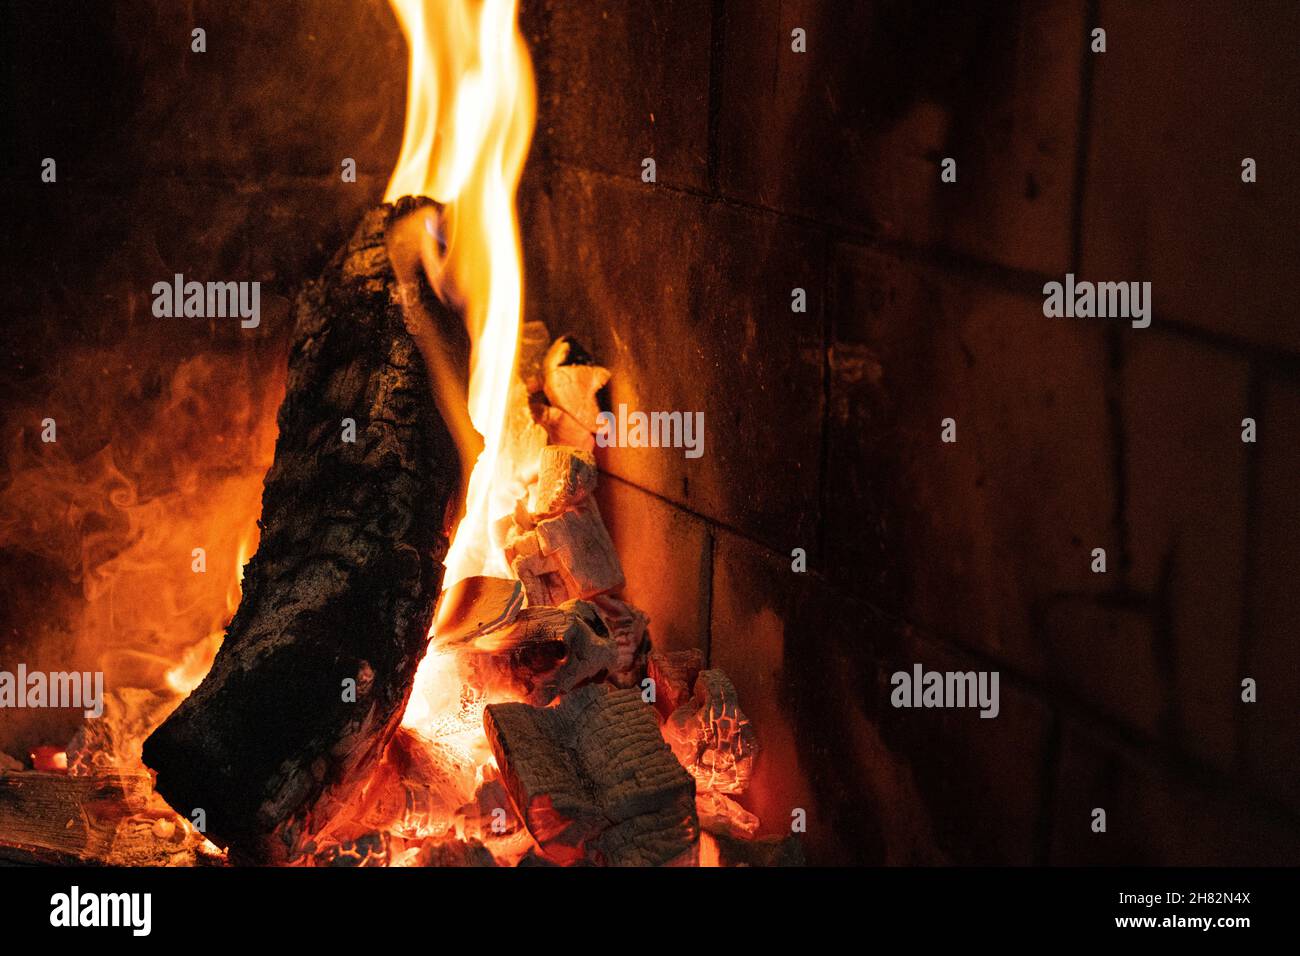 Wallpaper of a fire on a brick background. Stock Photo